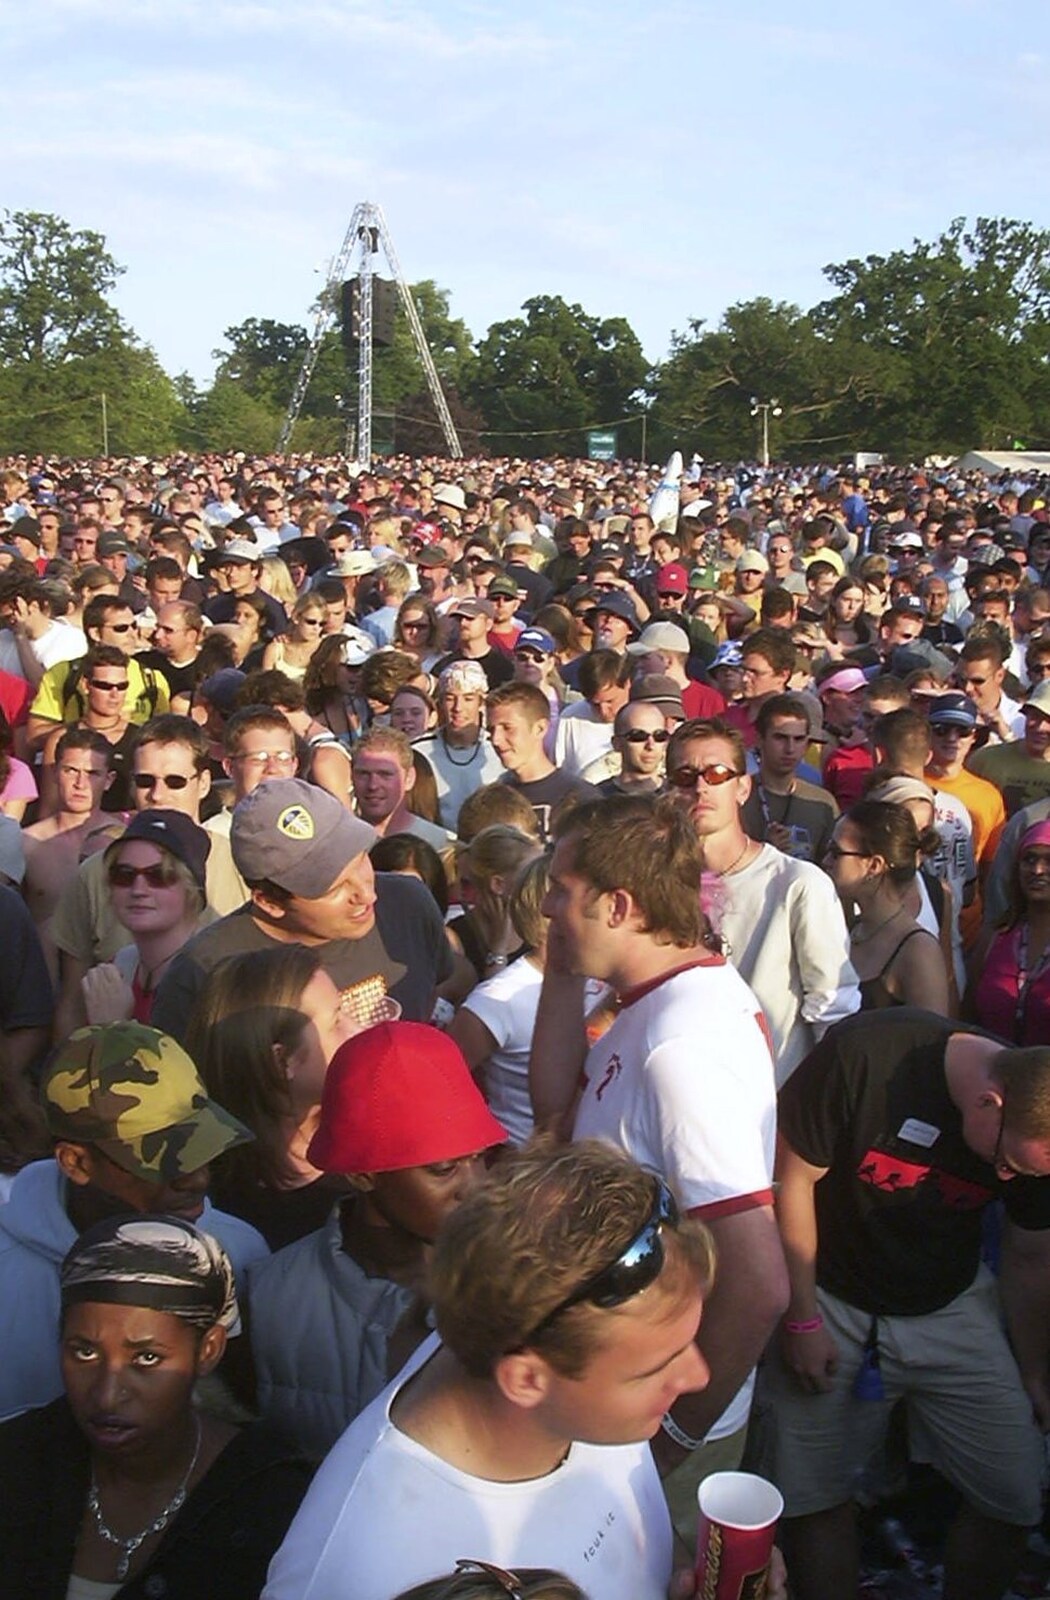 More crowds from V Festival 2003, Hyland's Park, Chelmsford, Essex - 16th August 2003